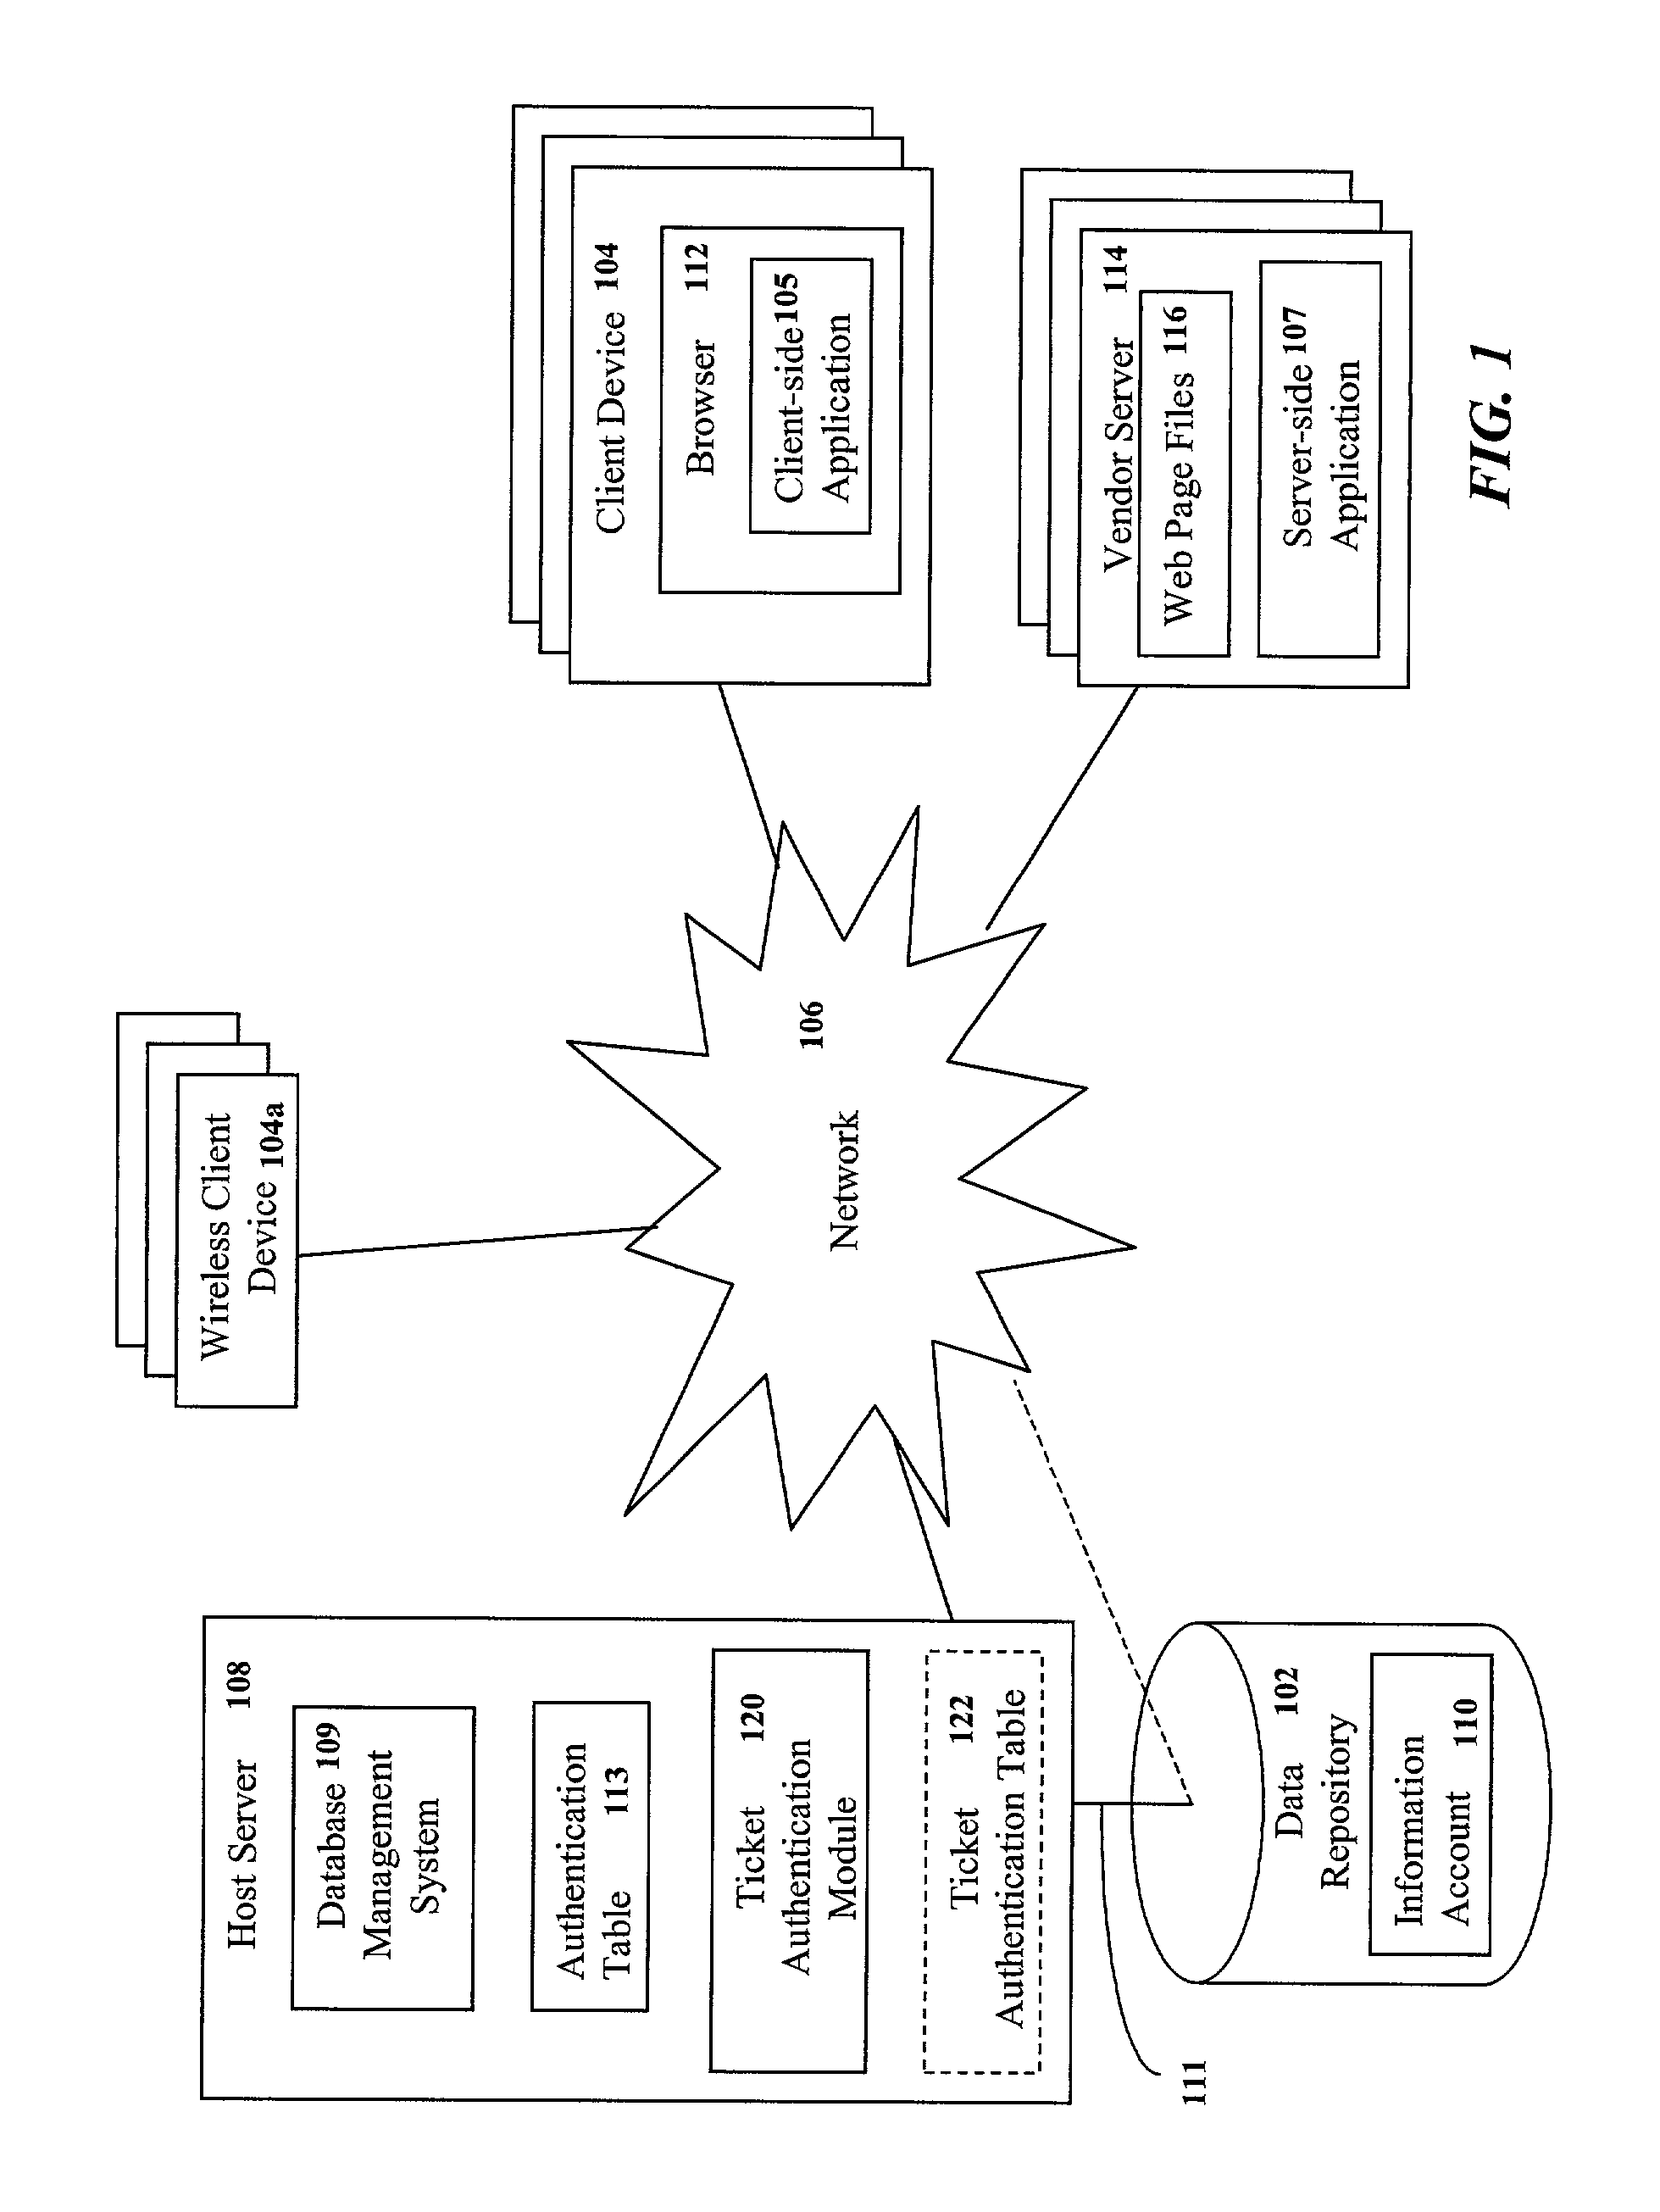 Consumer-controlled limited and constrained access to a centrally stored information account